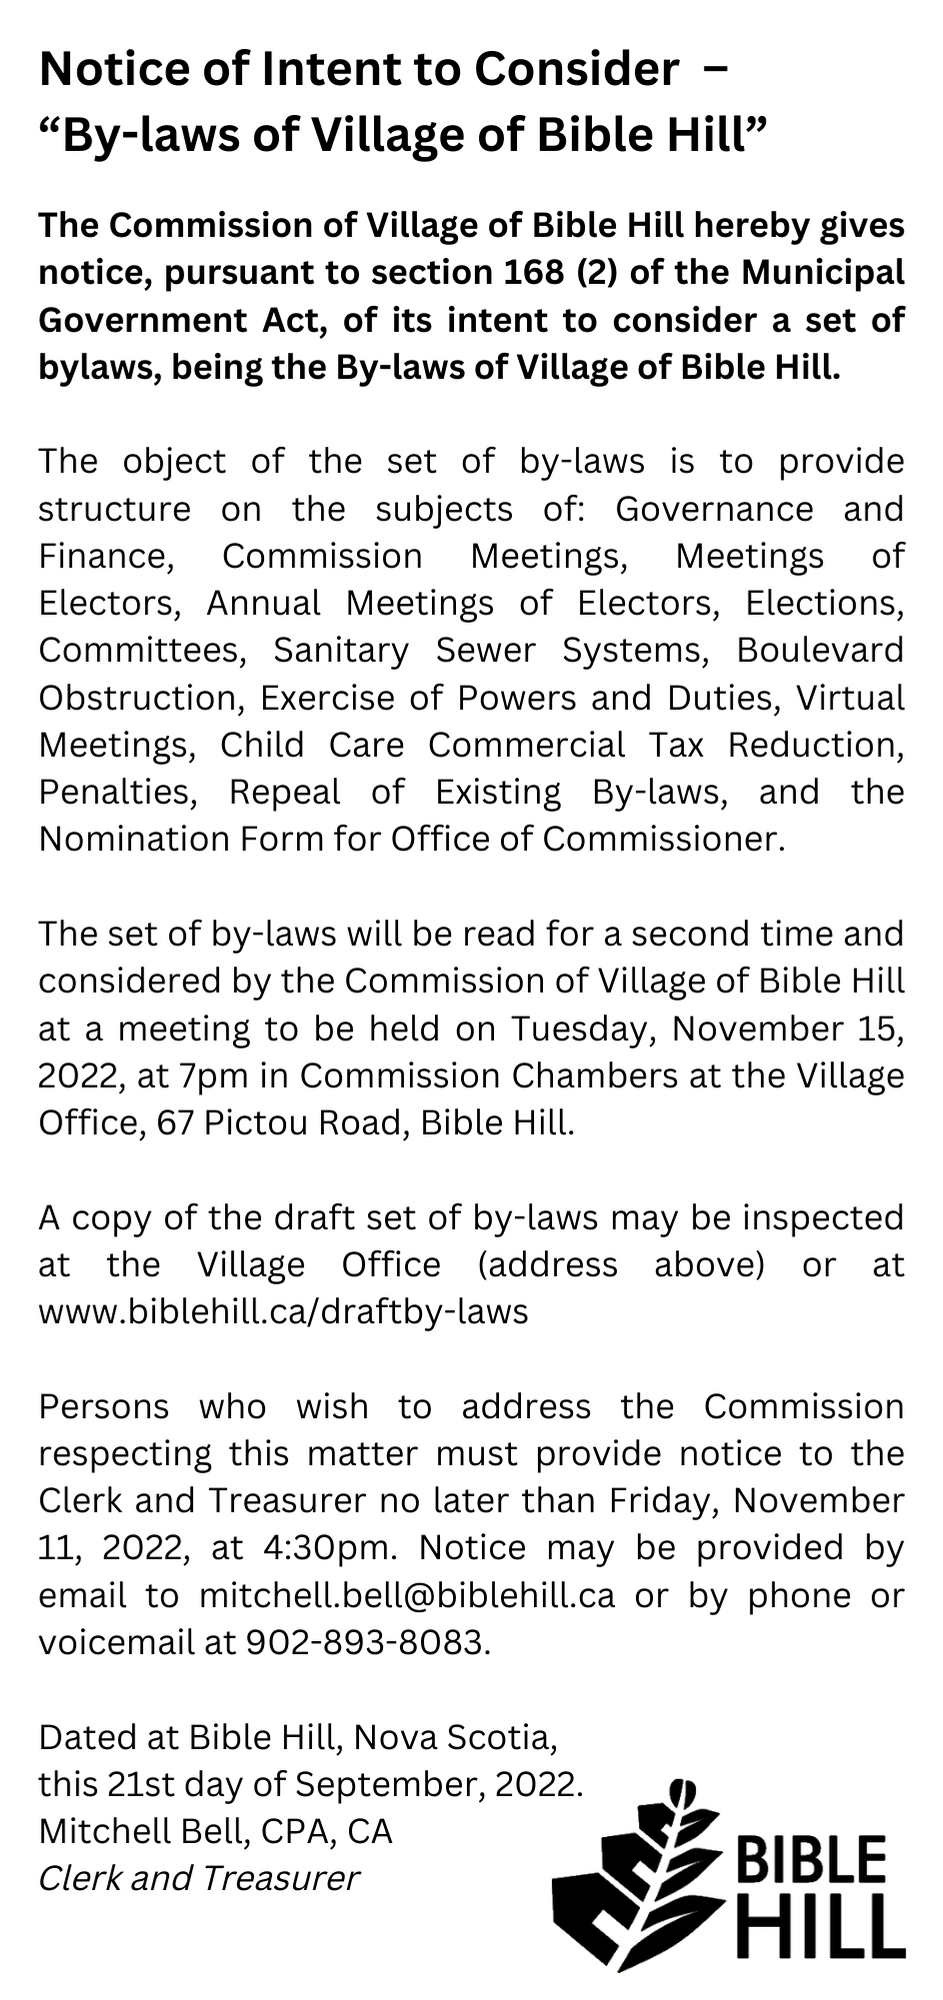 Notice of Intent to Consider By laws of Village of Bible Hill Village of Bible Hill hereby gives notice pursuant to section 168 2 of the Municipal Government Act of its intent to consider a set of